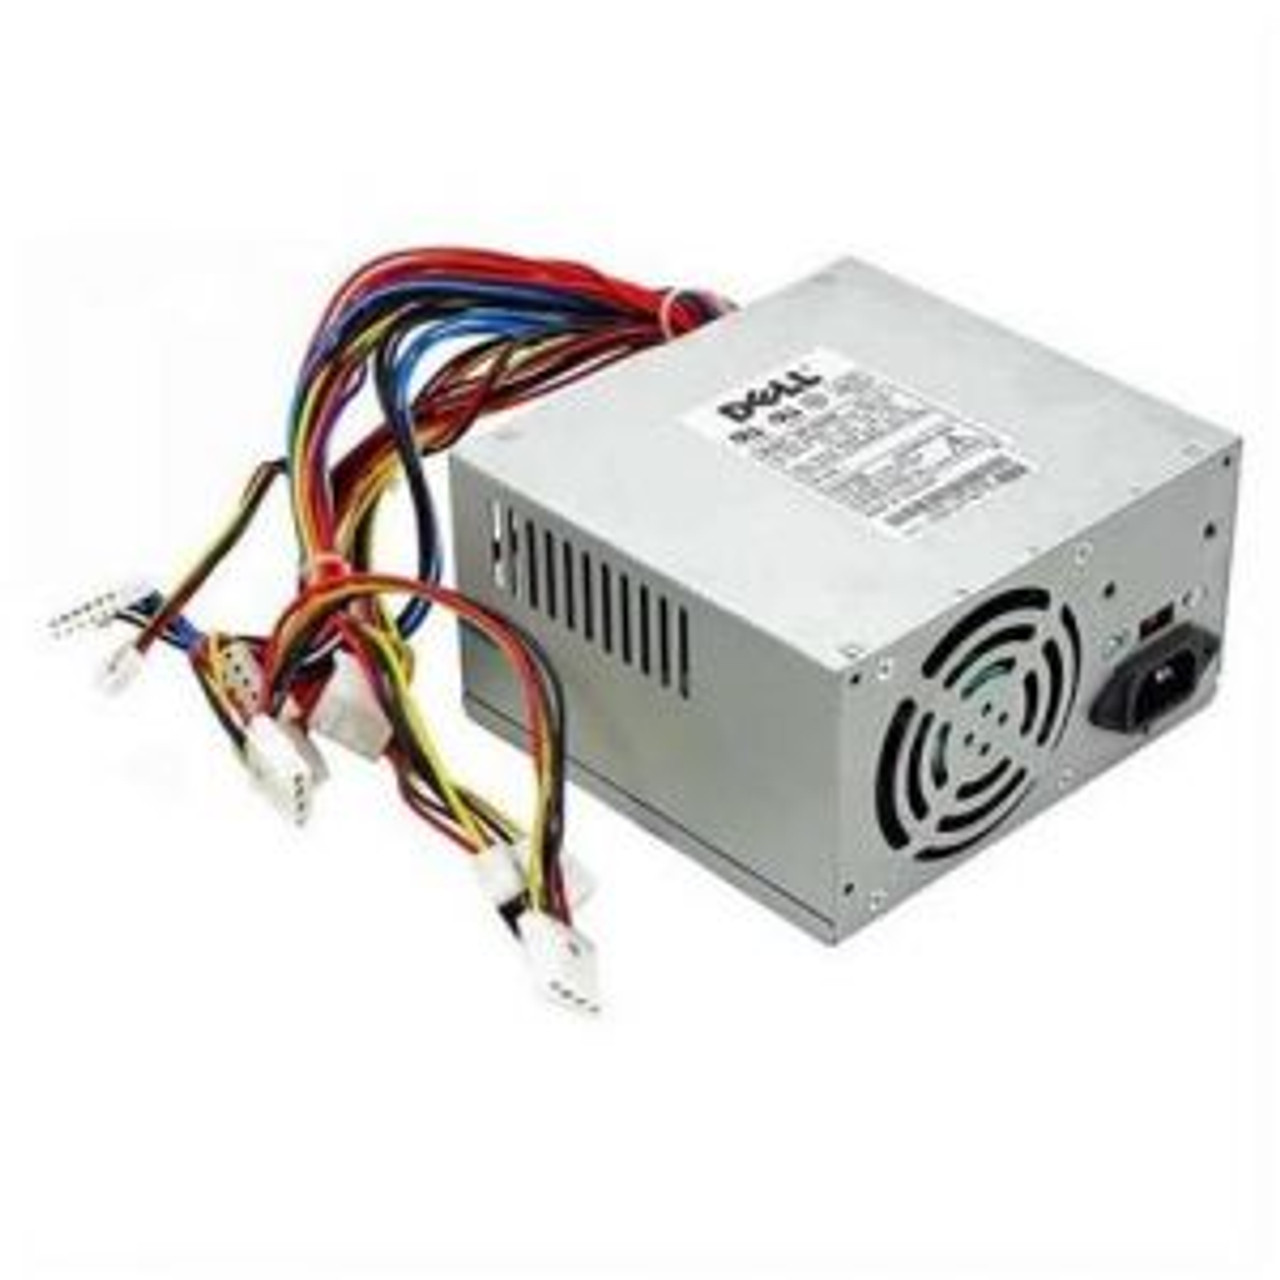 OR0910 Dell 300-Watts Redundant Power Supply for PowerE